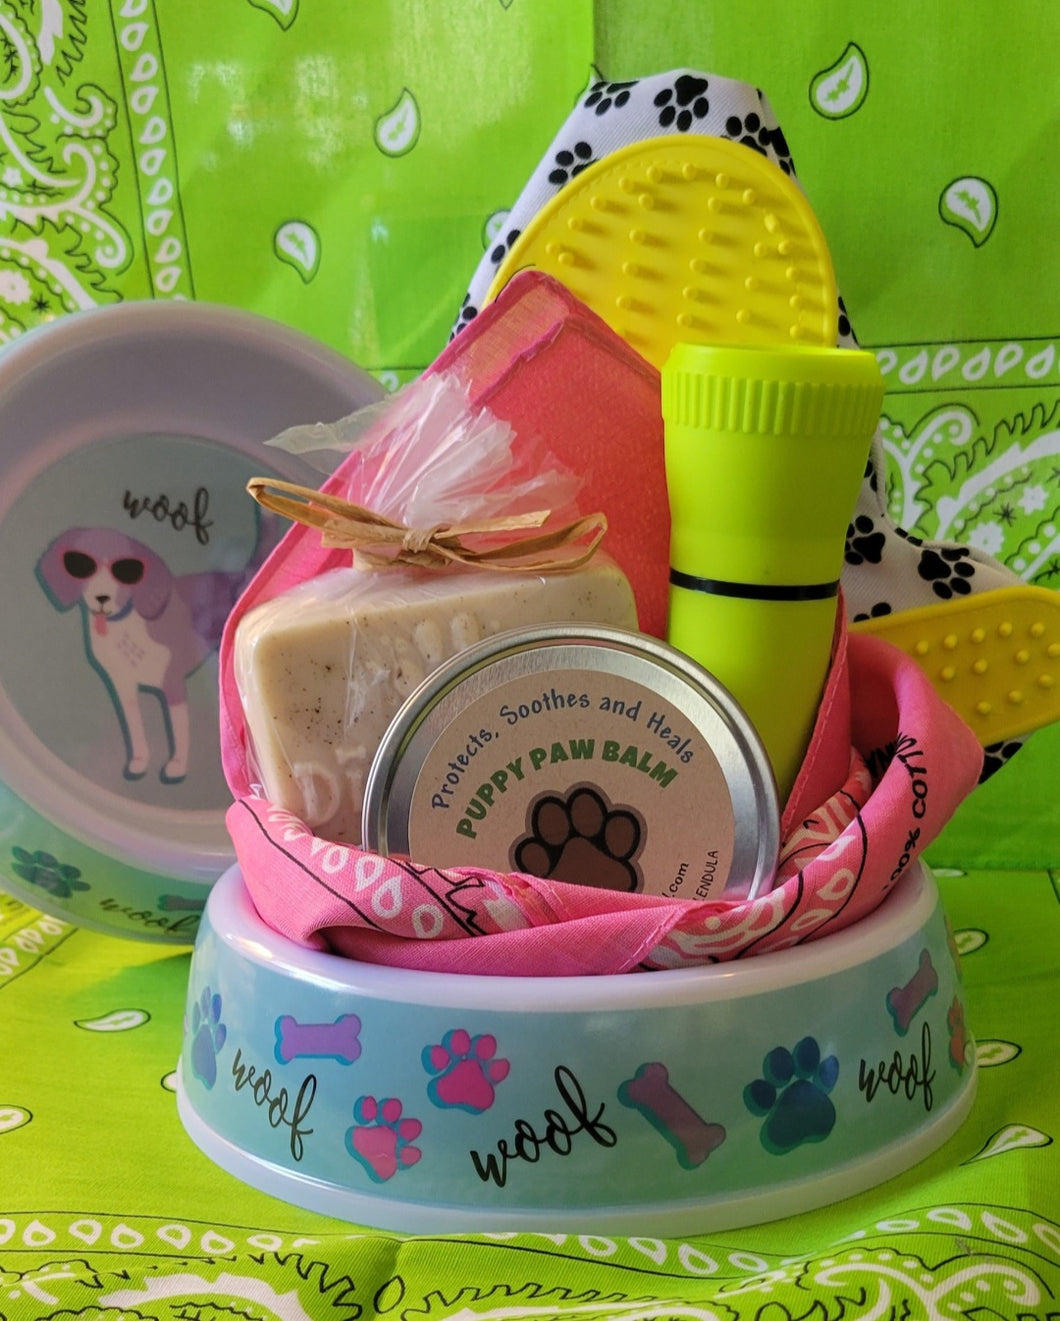 Man's Best Friend Gift Bowl! Oh Those Snazy Sunglasses, Woof! Deluxe. - Sisters Soap Kitchen